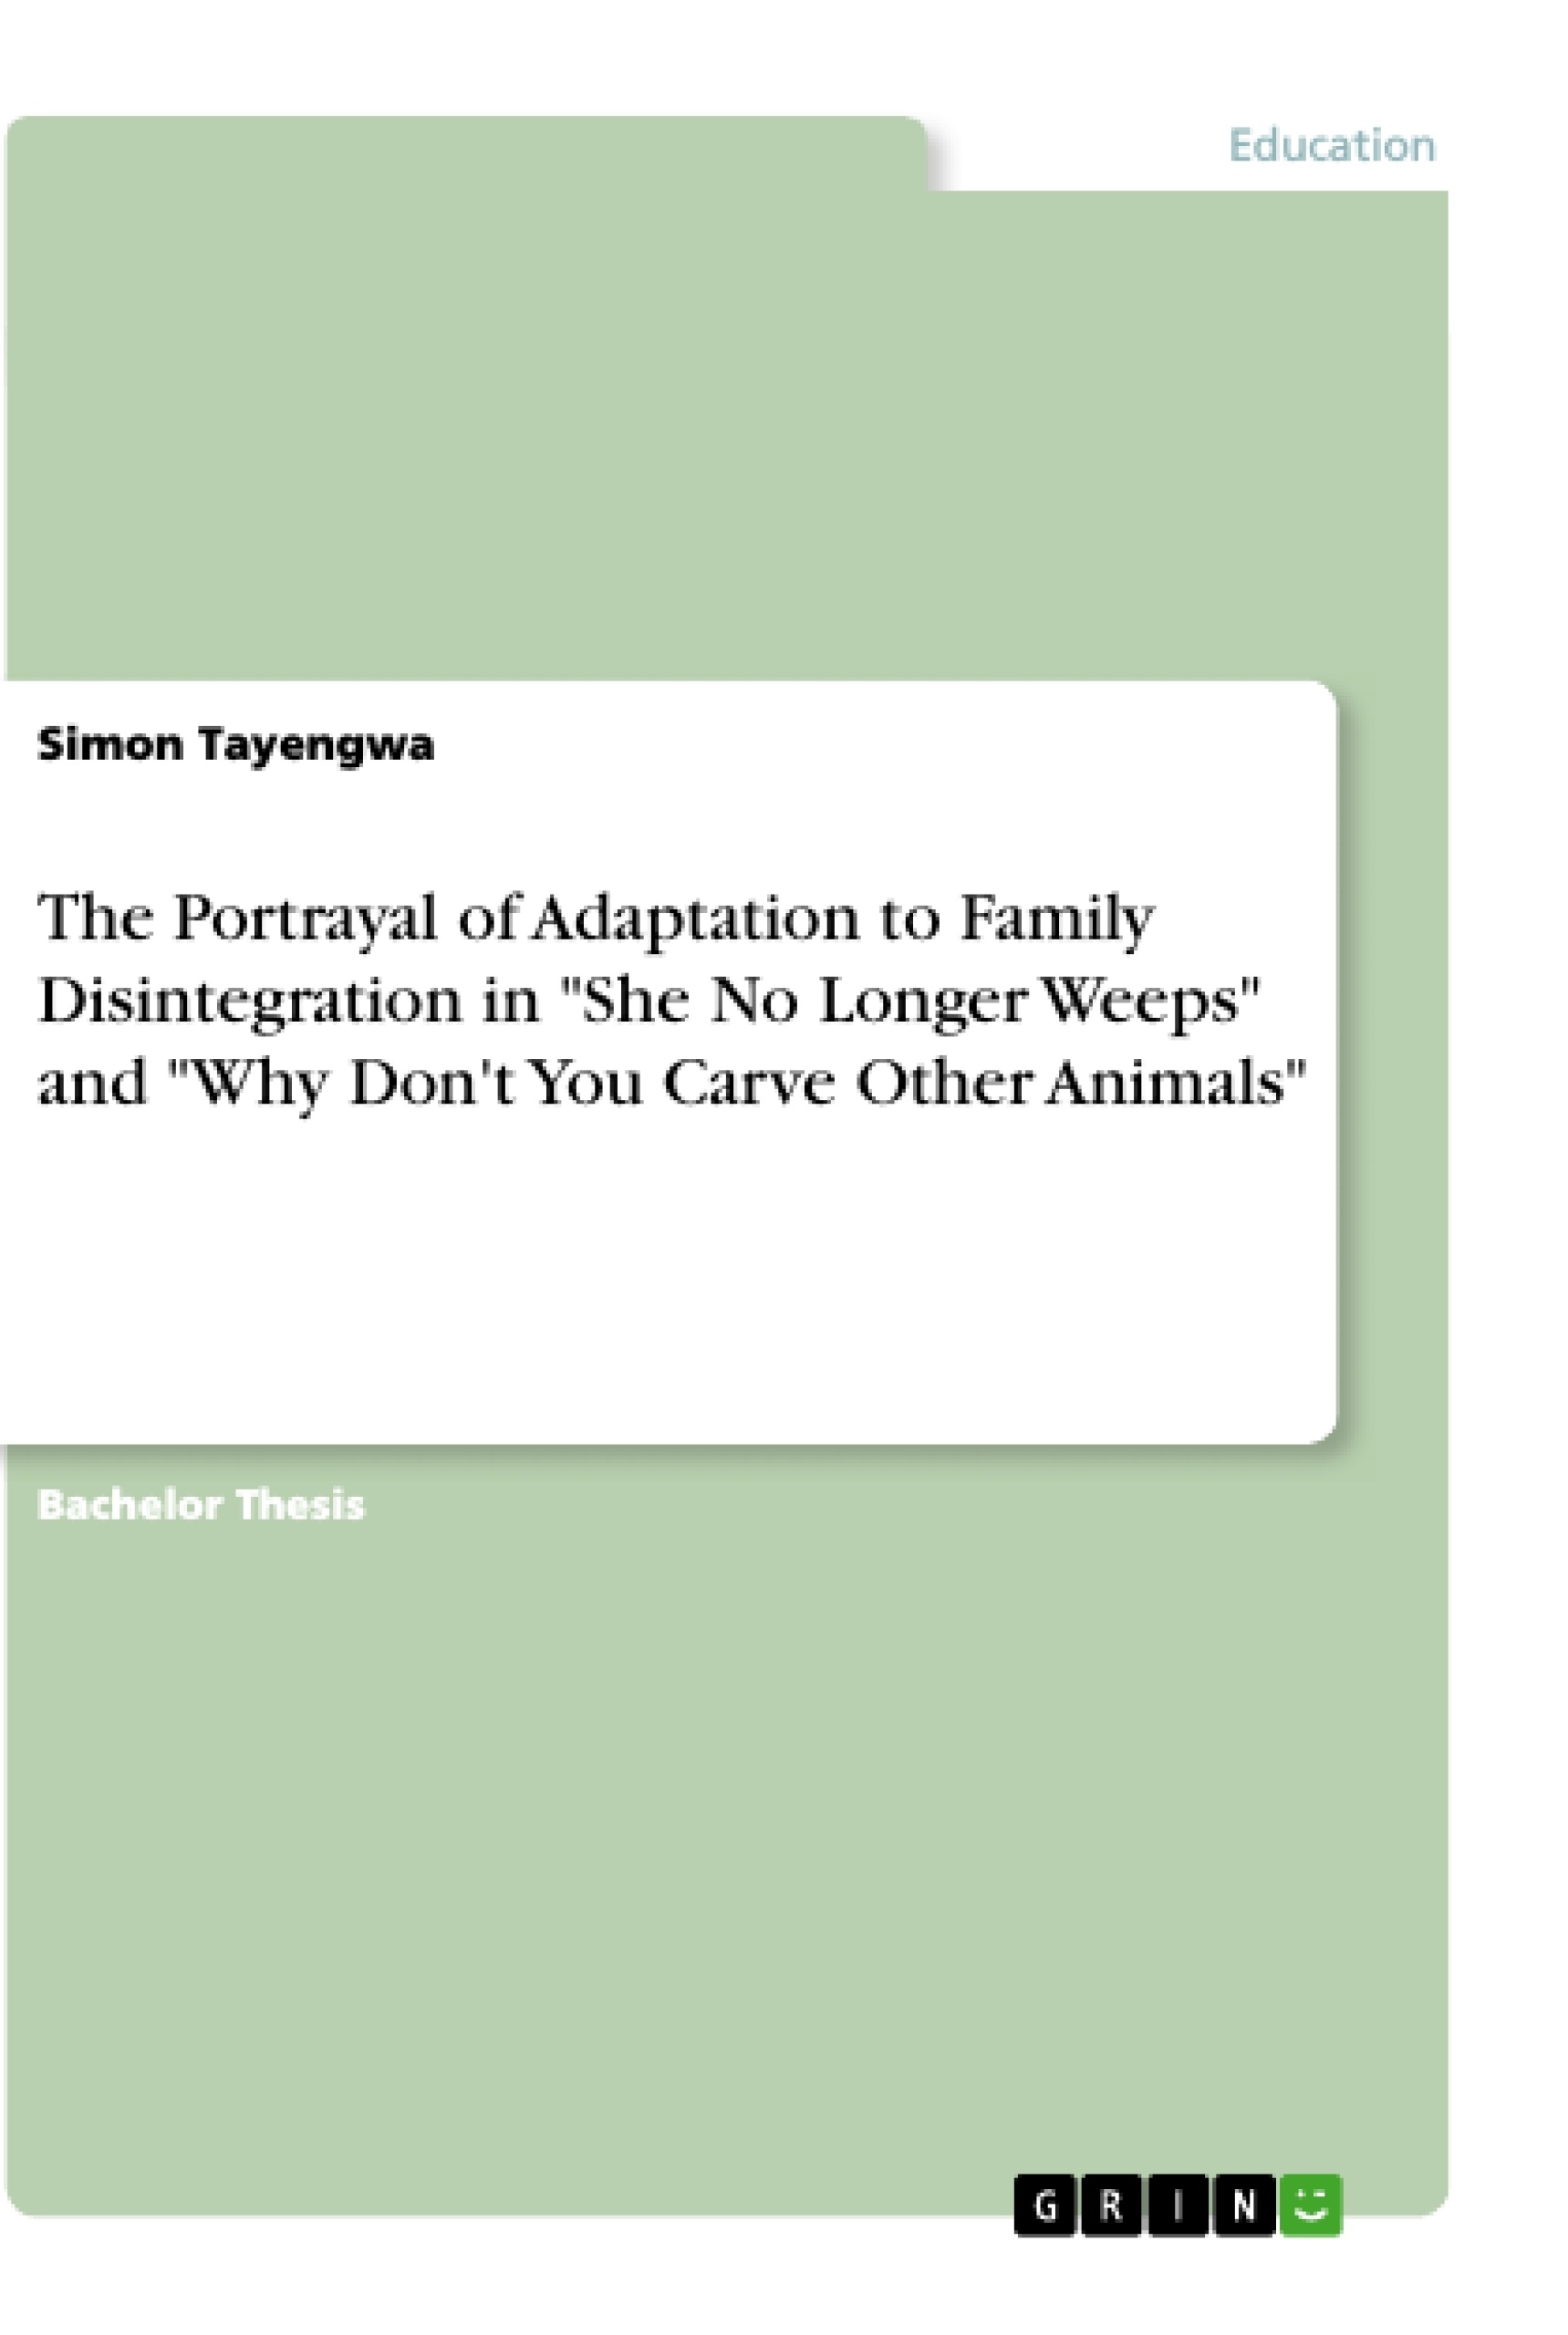 Titre: The Portrayal of Adaptation to Family Disintegration in "She No Longer Weeps" and "Why Don't You Carve Other Animals"